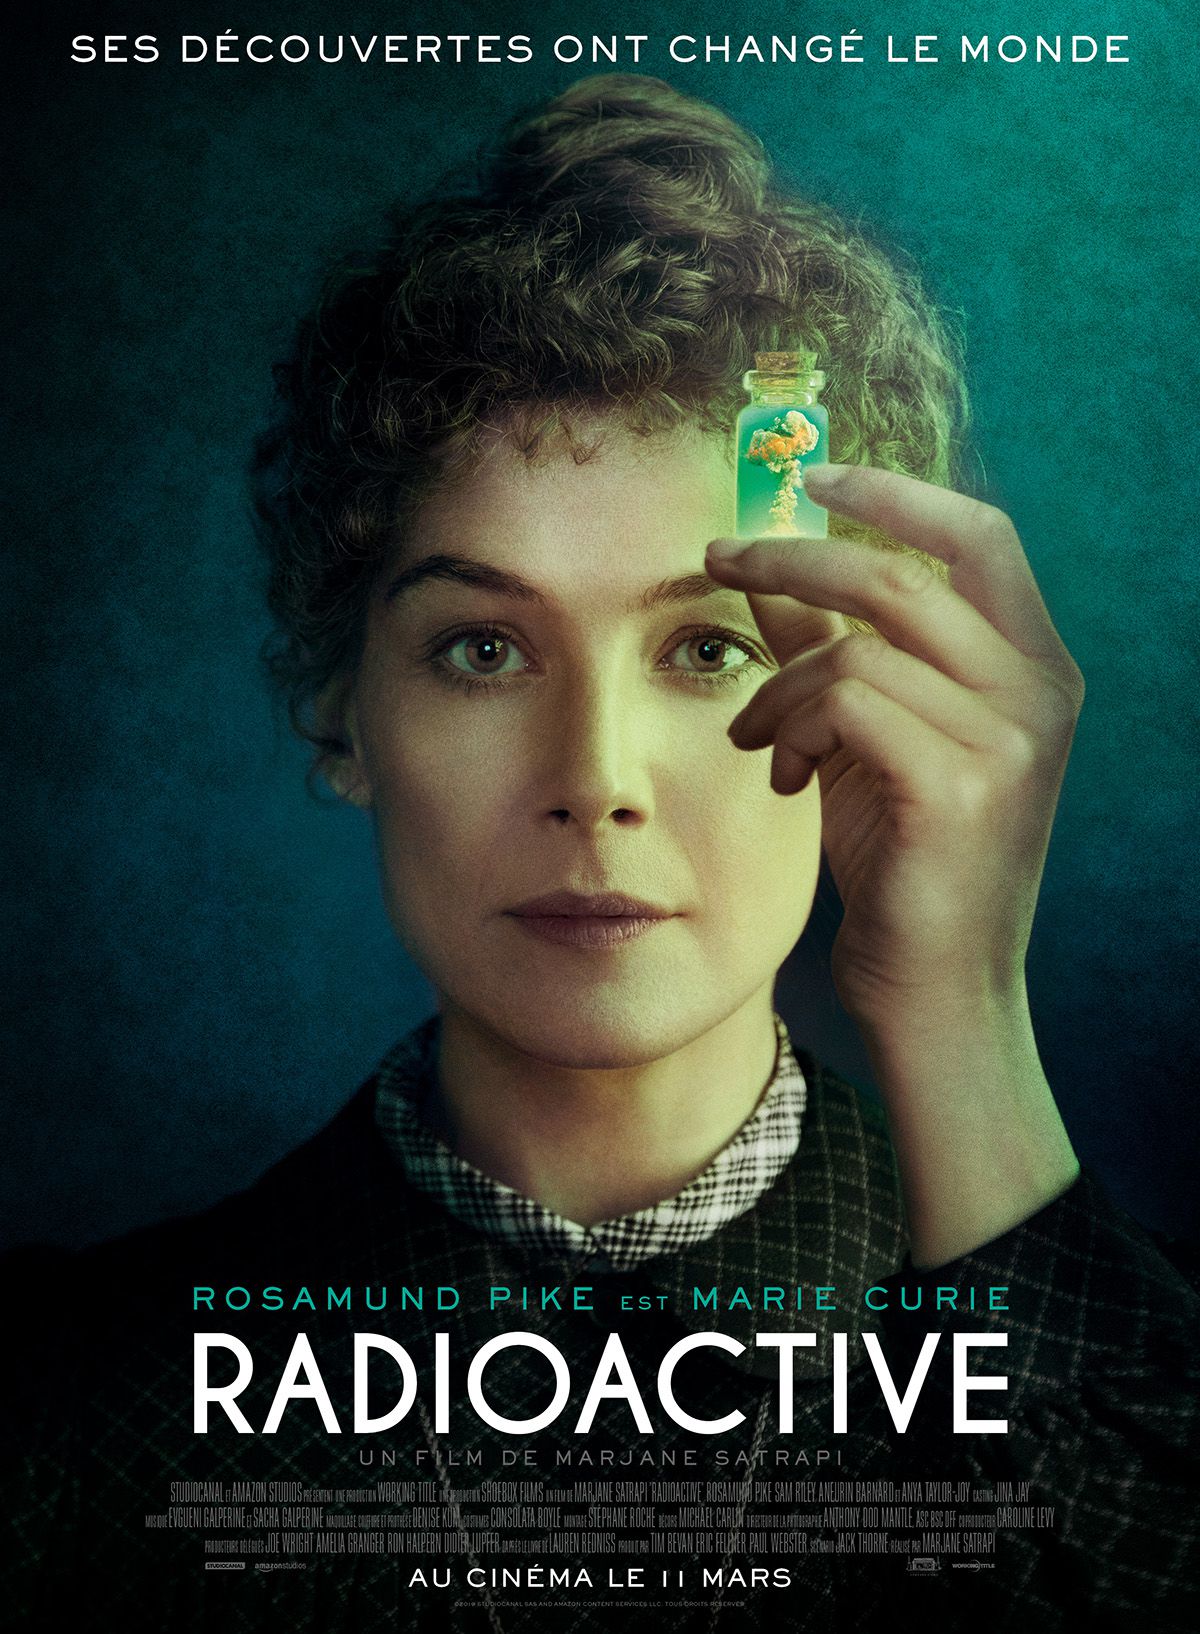 Radioactive - Film (2020) streaming VF gratuit complet